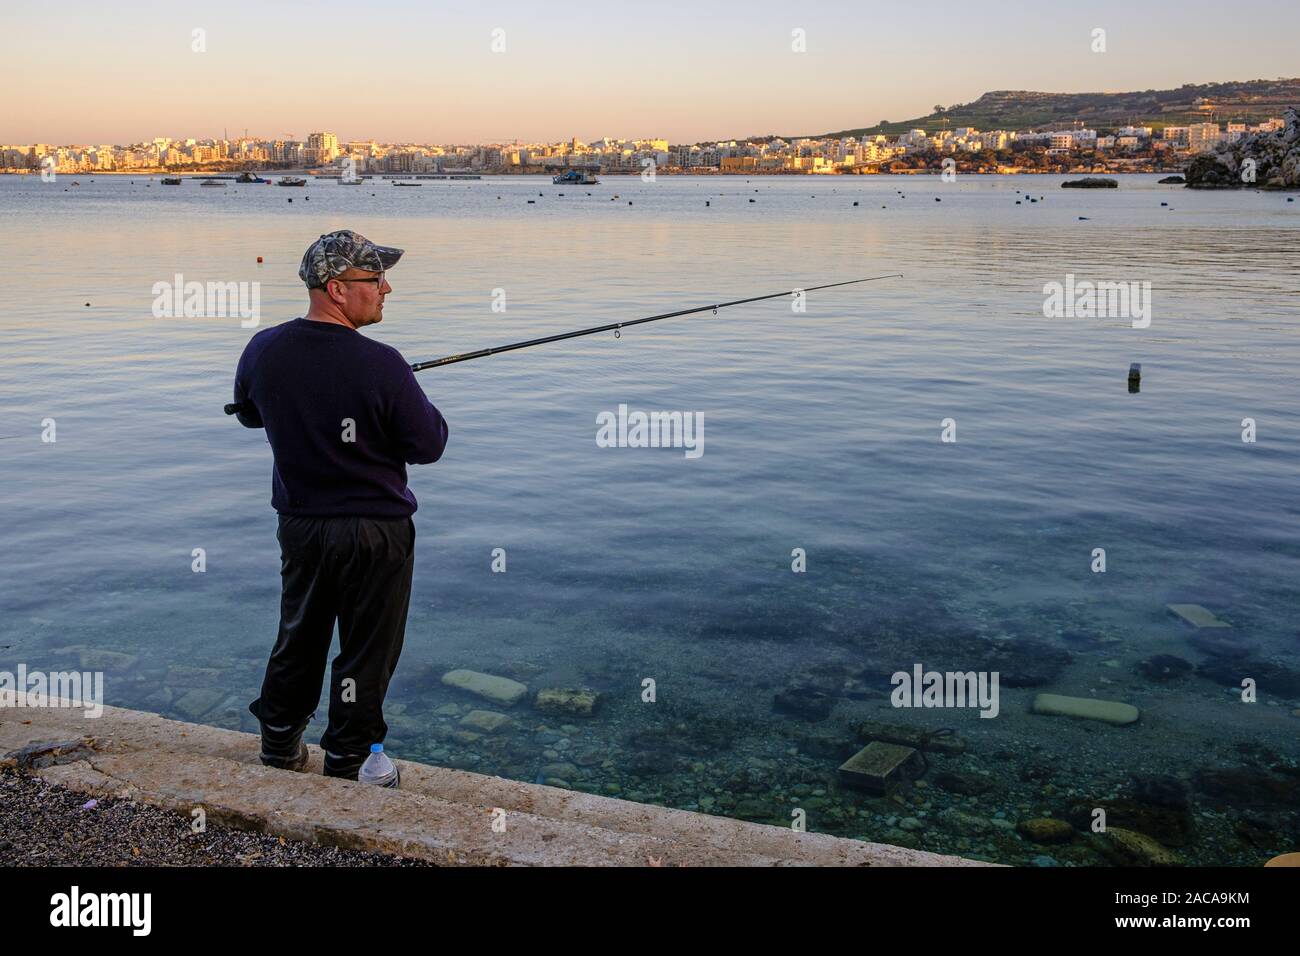 Fishing in the evening at Mistra Bay with a view across Saint Paul's Bay towards Bugibba, Malta Stock Photo